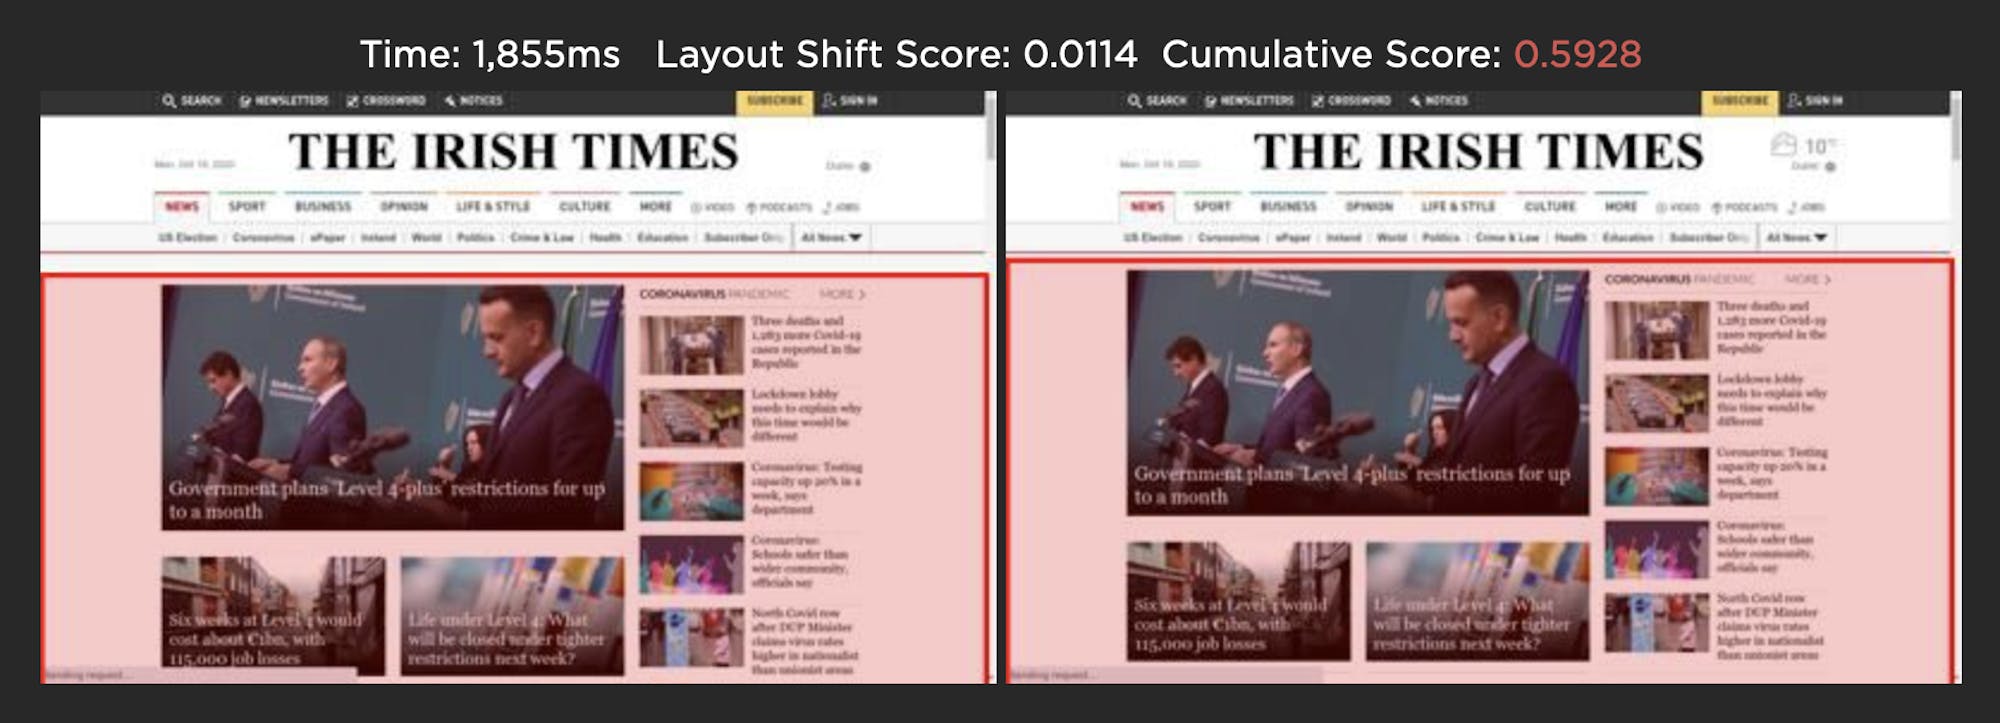 CLS small layout shift